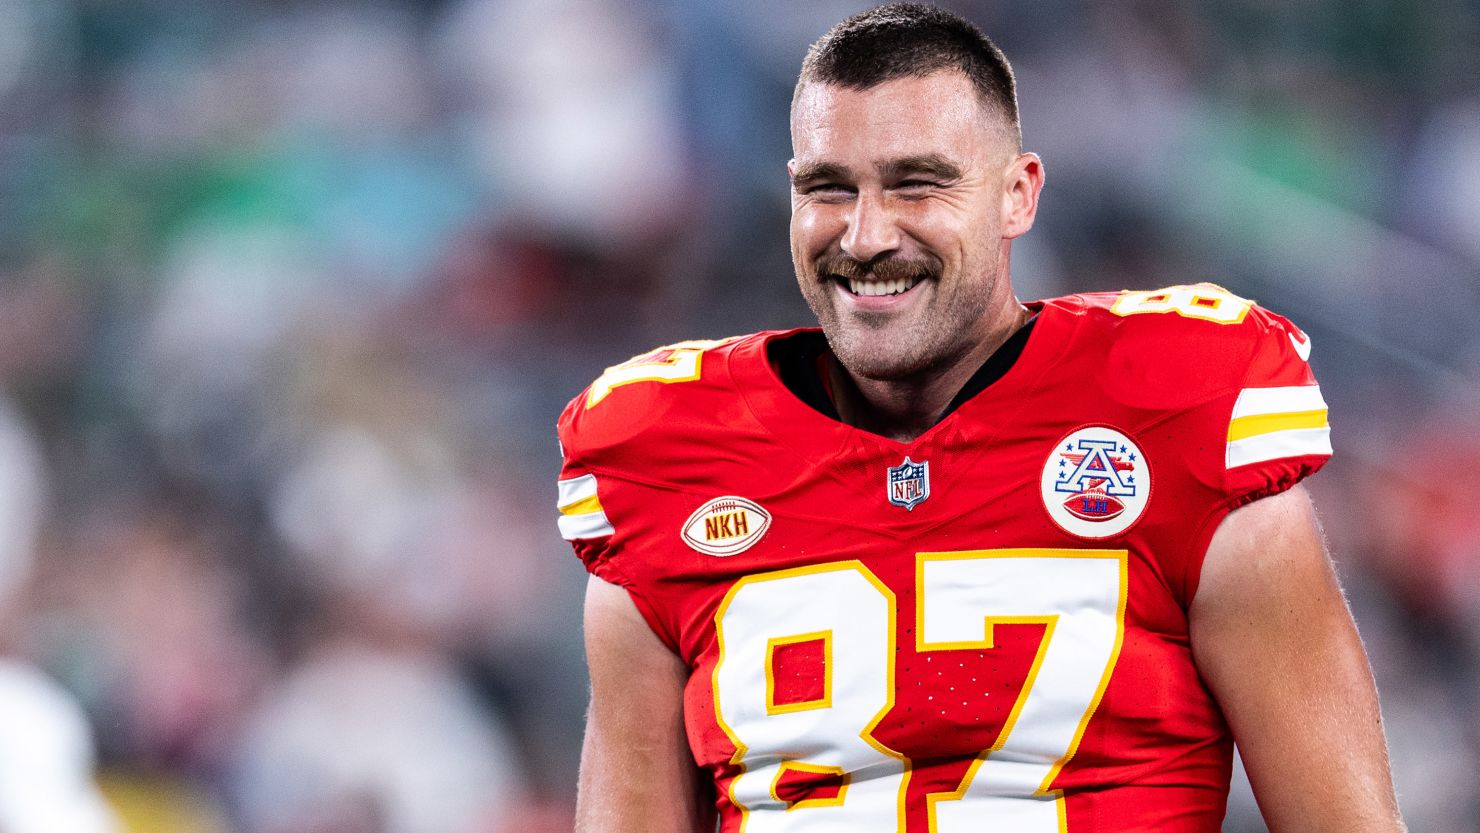 NFL News: Travis Kelce Continues to Shine, How He’s Defying Age and Keeping the Kansas City Chiefs on Top?